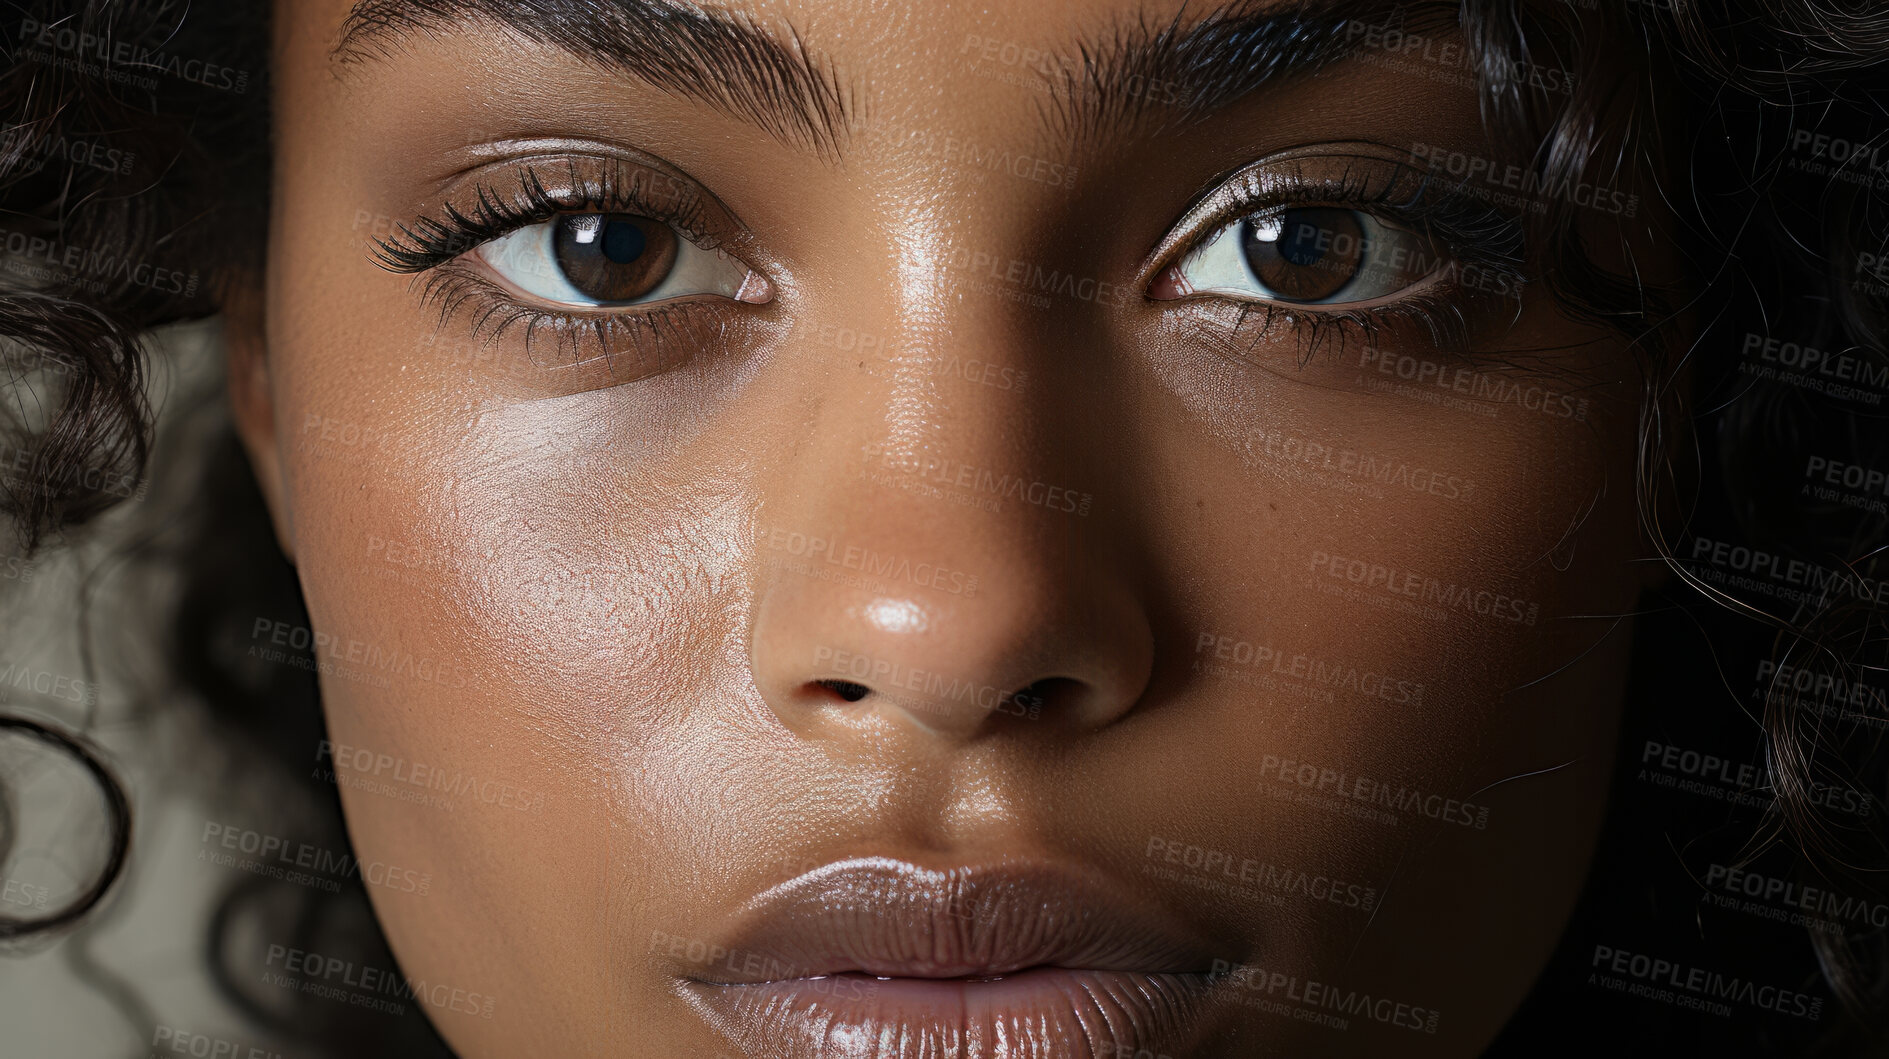 Buy stock photo Extreme close-up of model. Make-up, smooth skin, curly hair. Fashion, editorial concept.